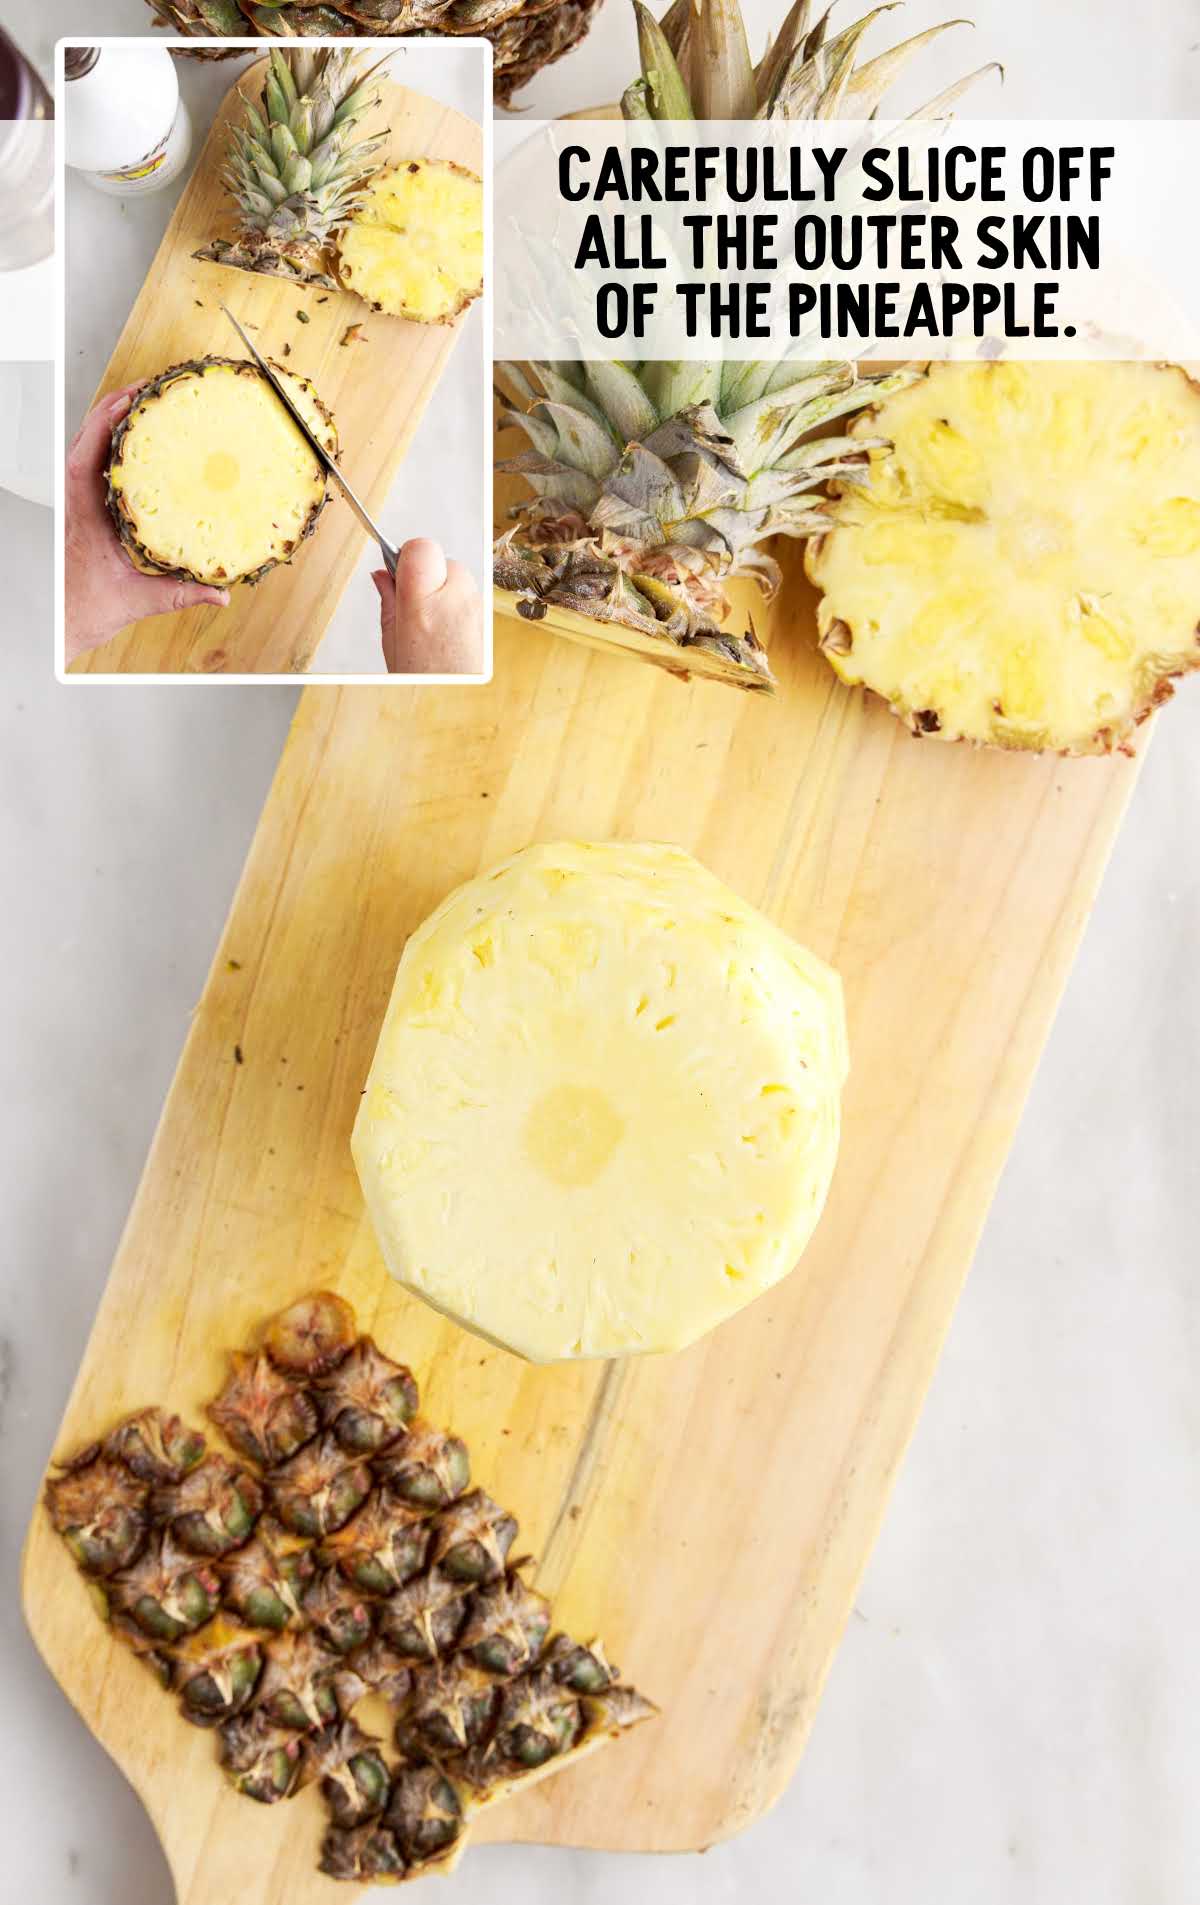 slicing off the outer skin of the pineapple on a cutting board